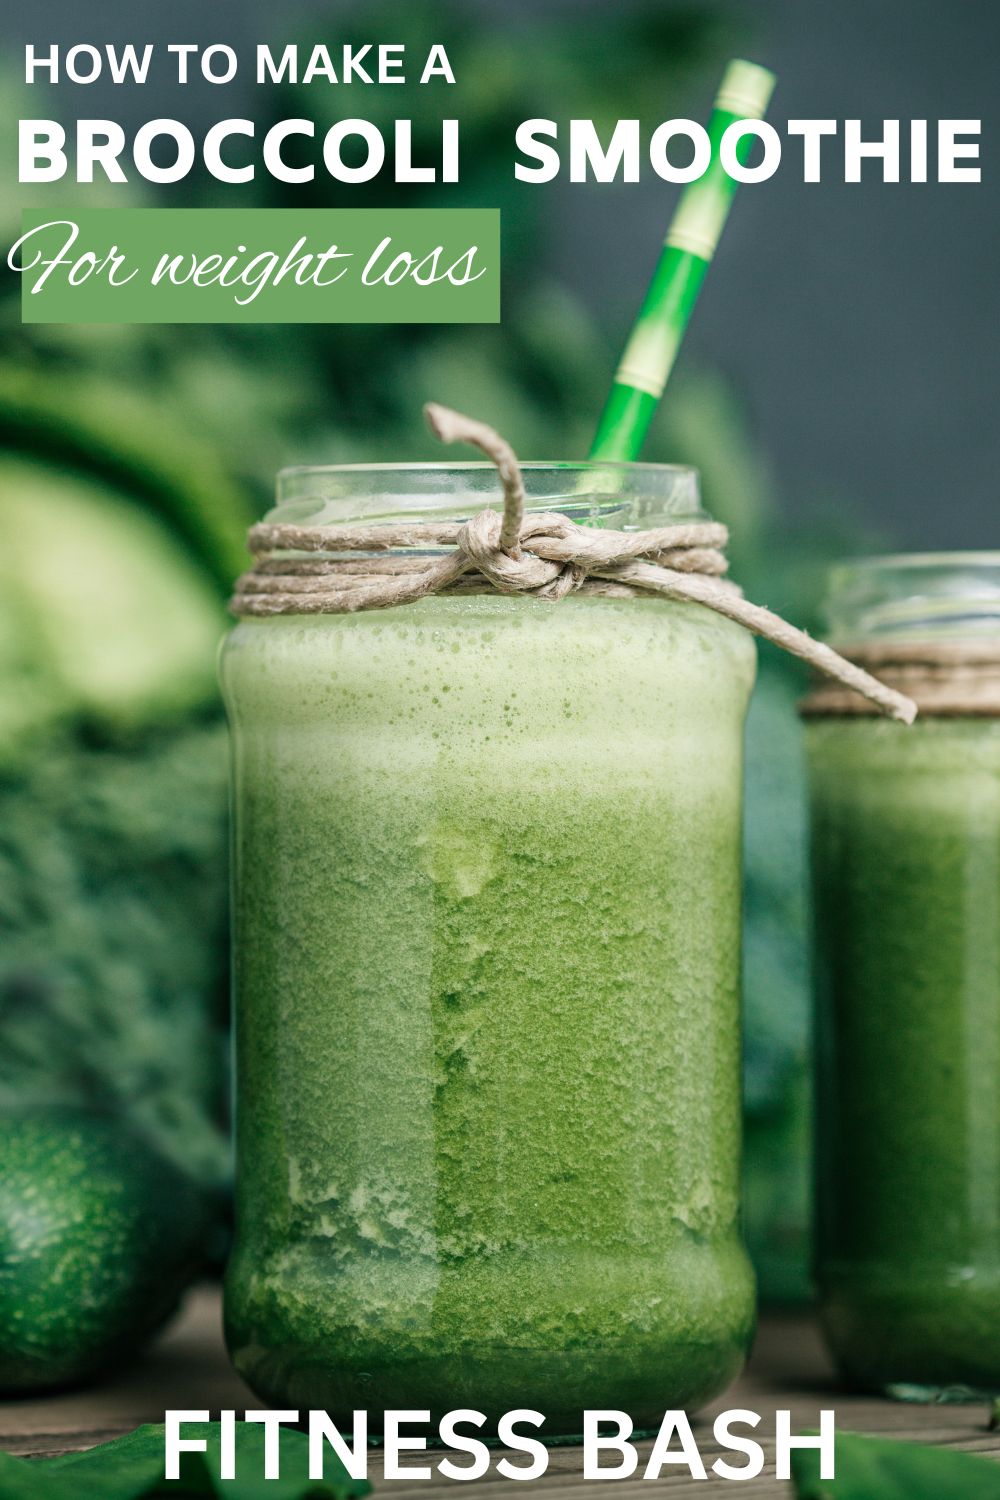 broccoli smoothie for weight loss